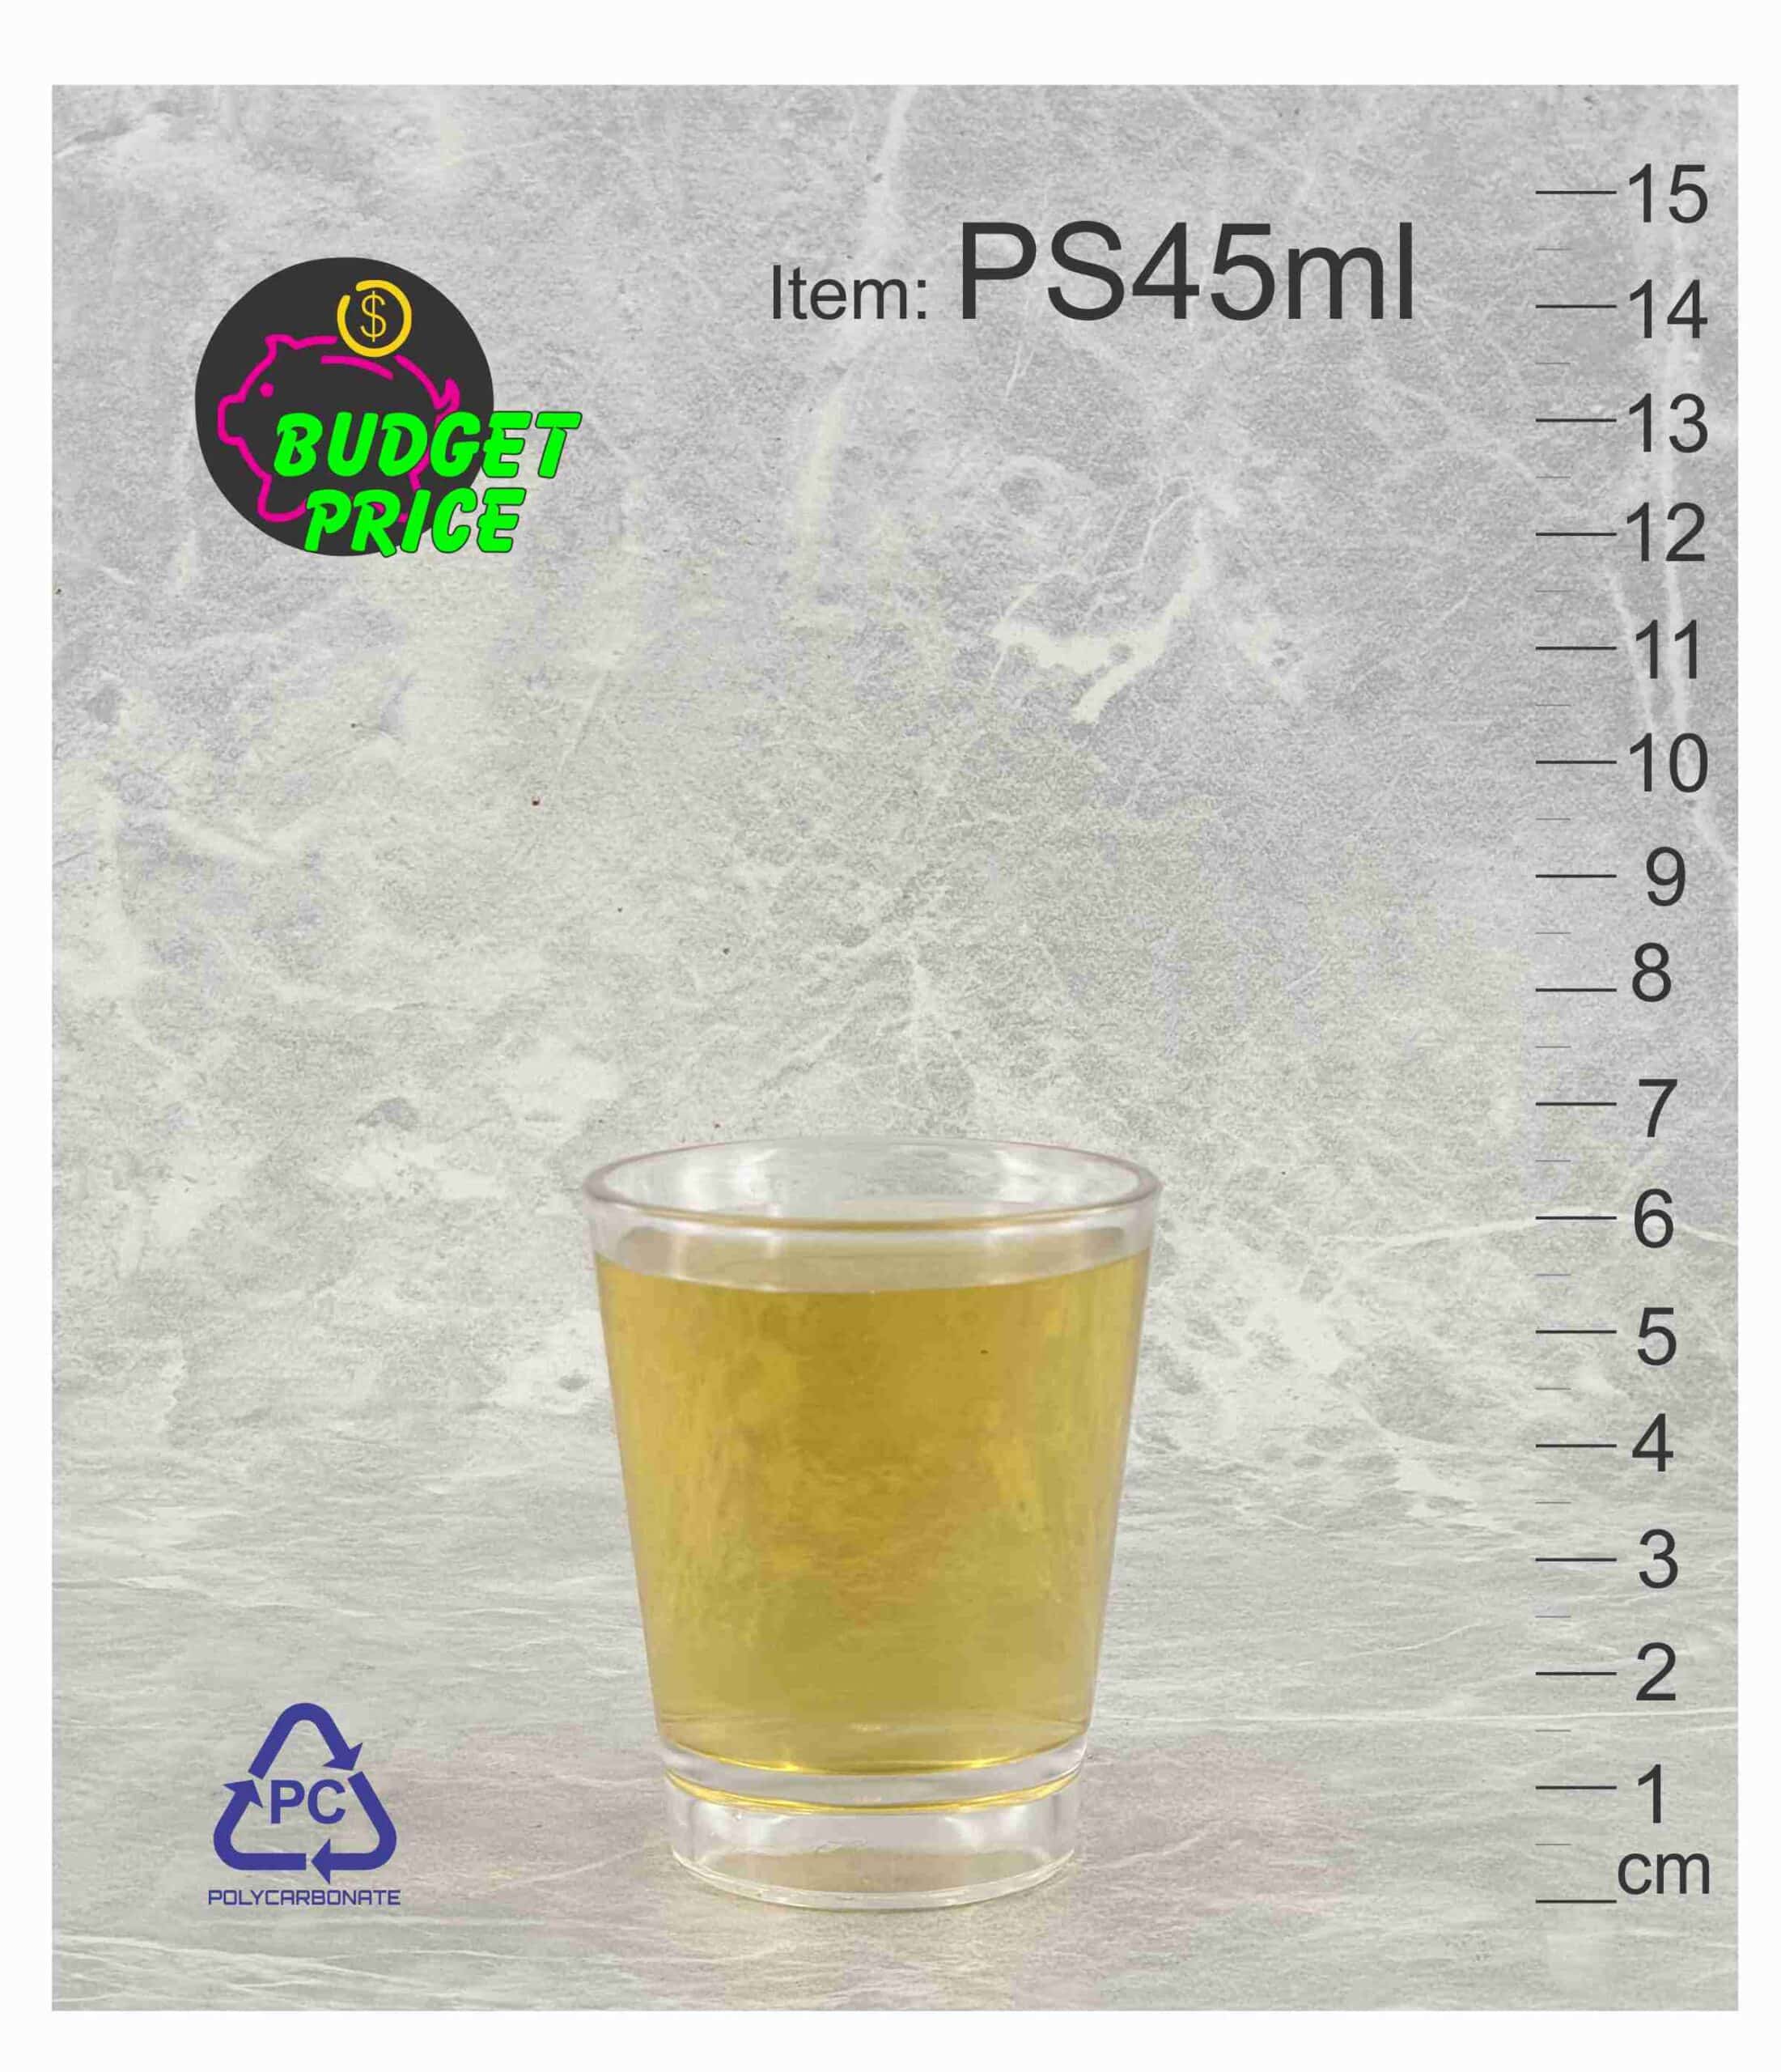 PS45 reusable unbreakable custom printed festival events party unique shape plastic shot glass whiskey whisky drinking rum vodka drink glasses Australia abc2000 scaled